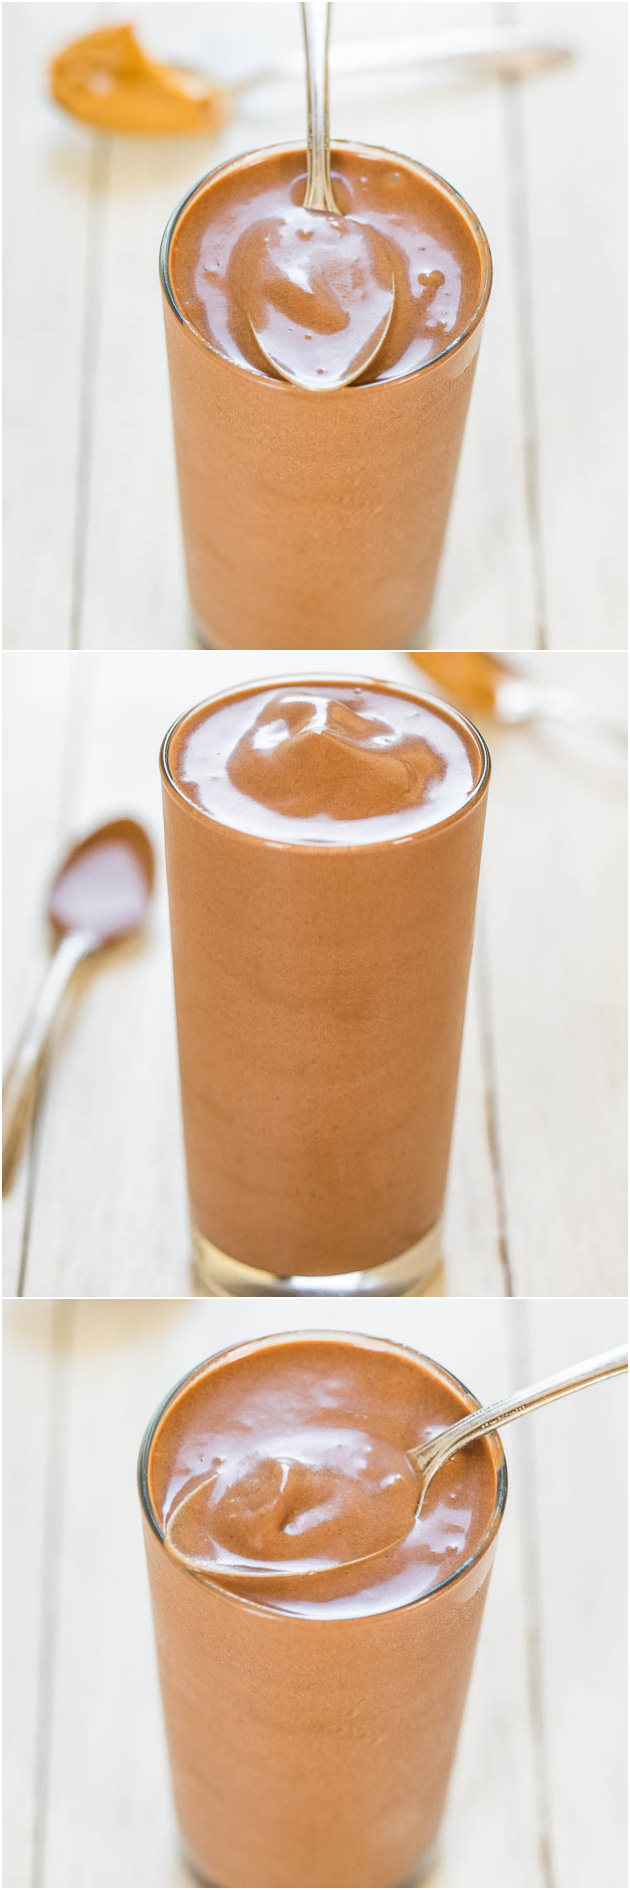 Chocolate Peanut Butter Smoothie — You'd never guess this fudgy peanut butter smoothie is actually healthy for you! Warning: you'll need a spoon for this smoothie that tastes like drinkable fudge! 